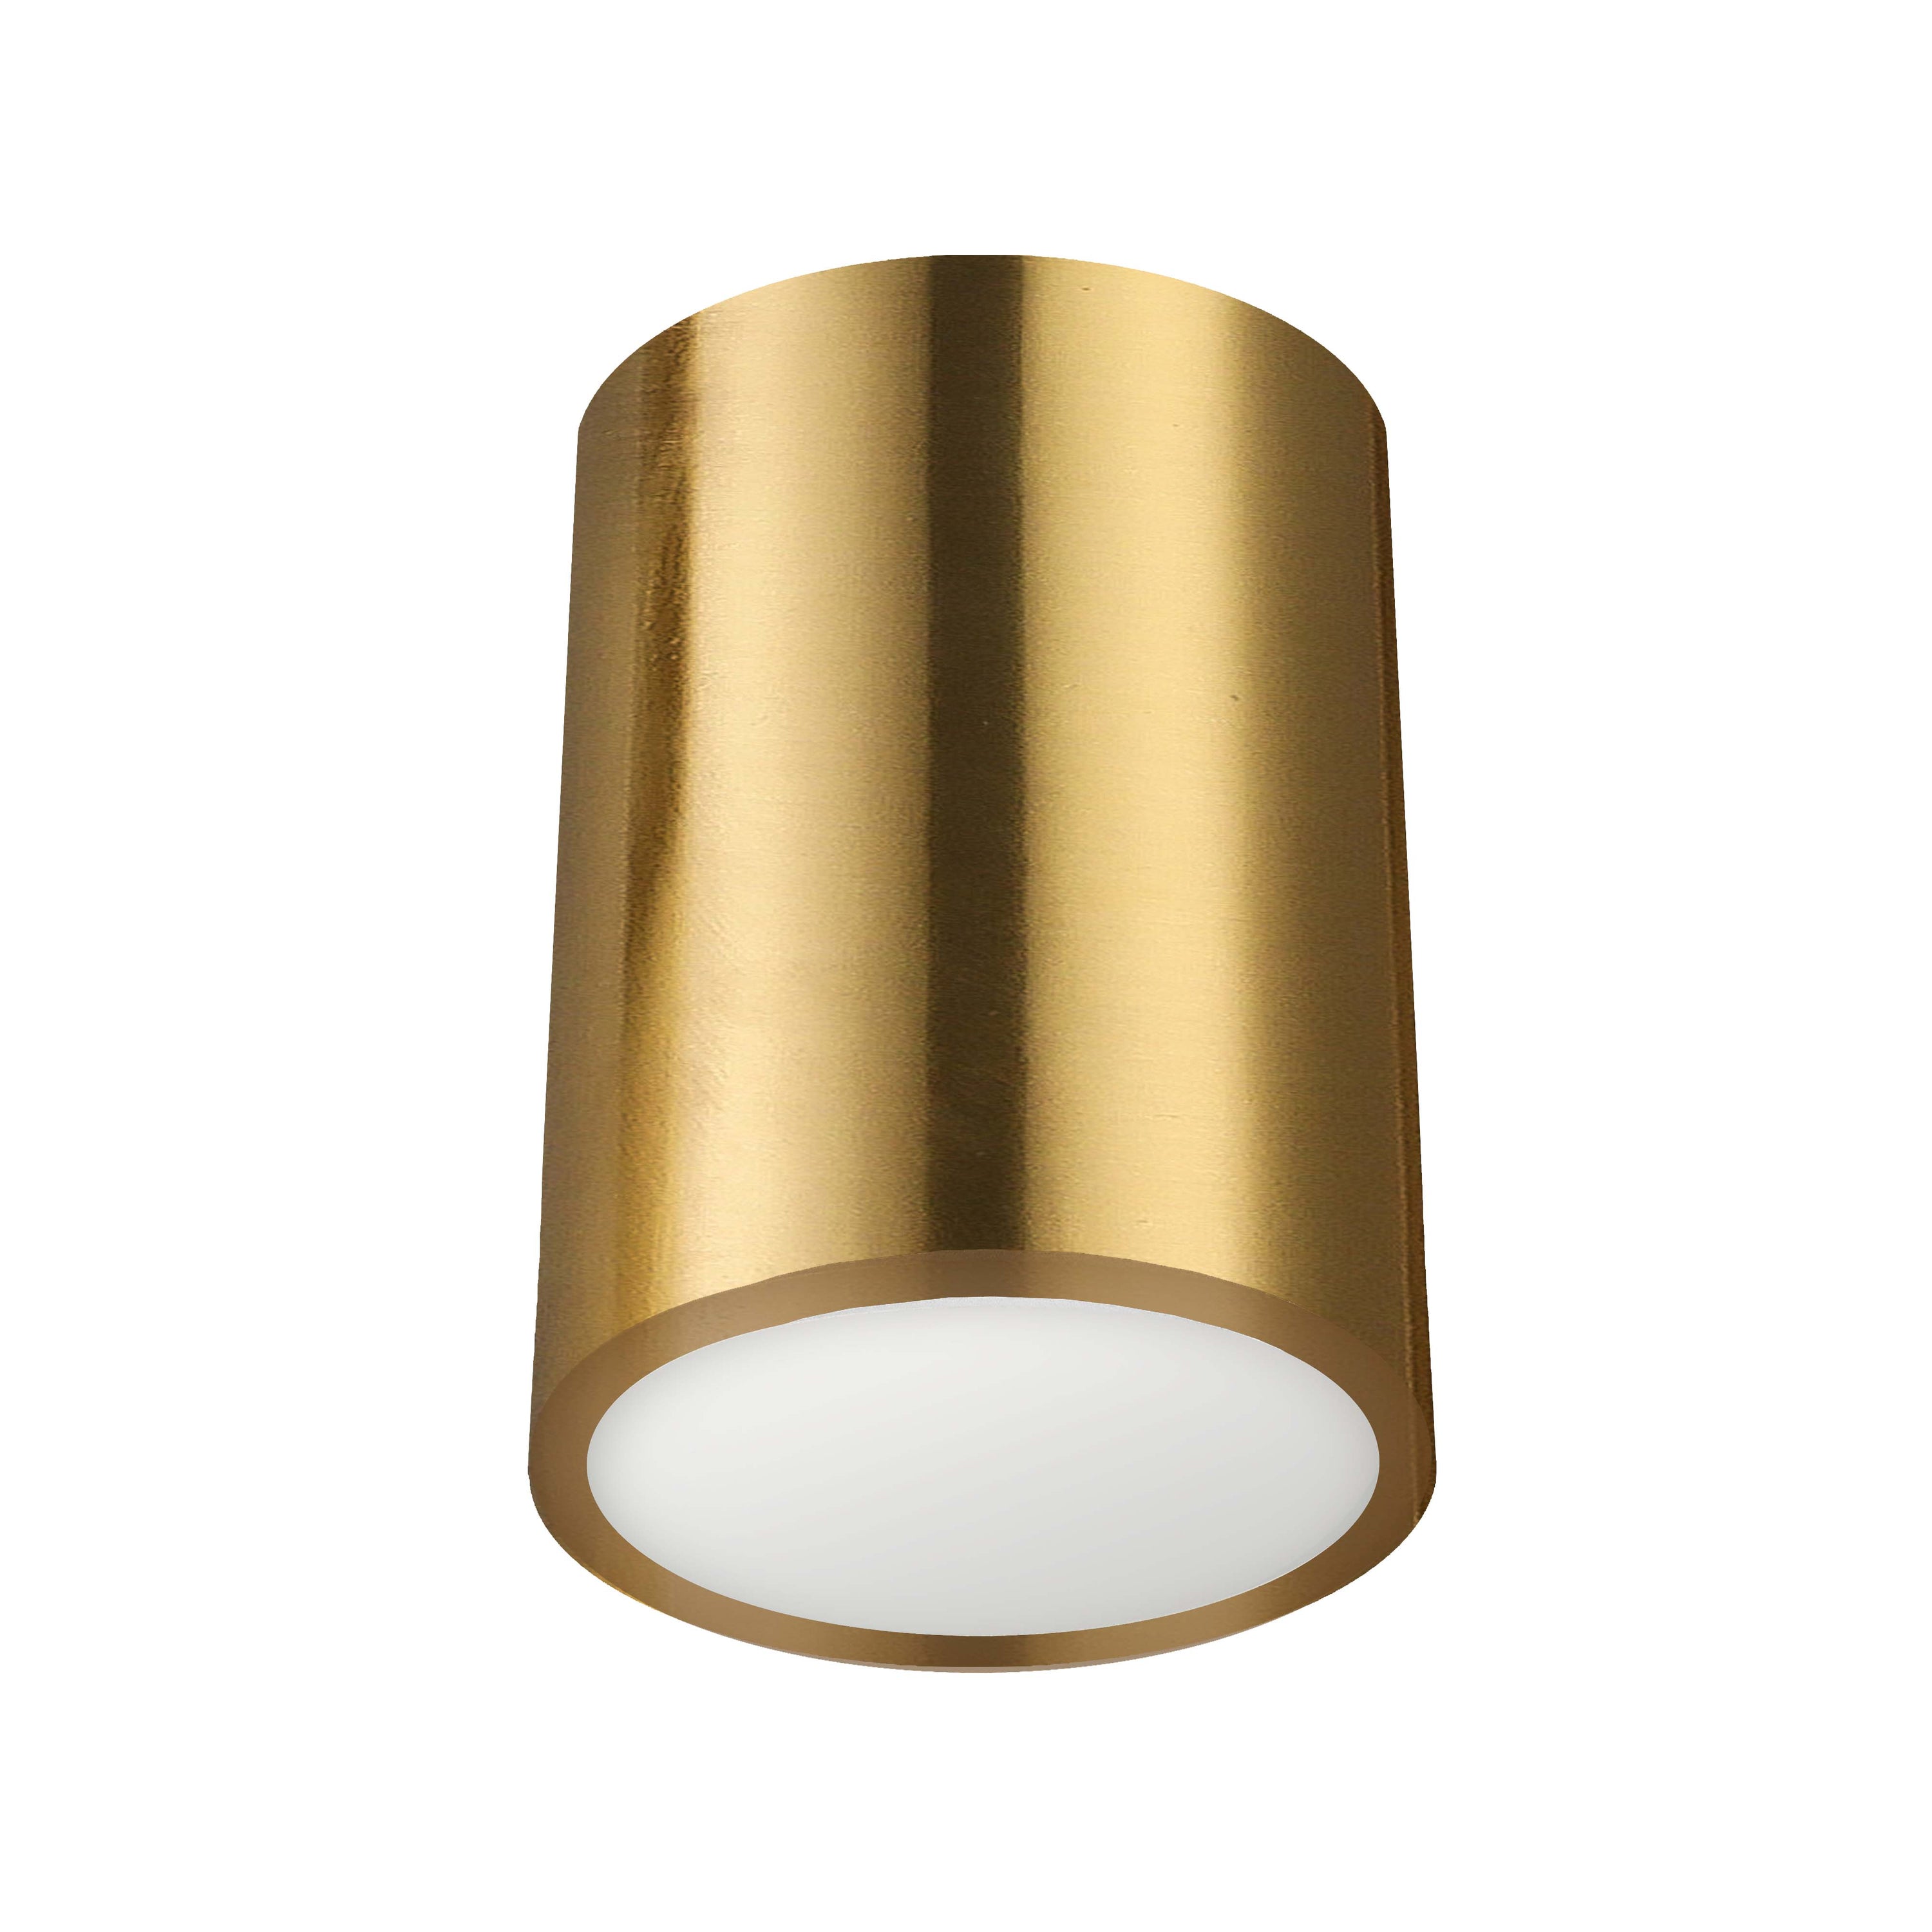 Dainolite ECO-C512-AGB 12W Flush Mount Aged Brass with Frosted Acrylic Diffuser